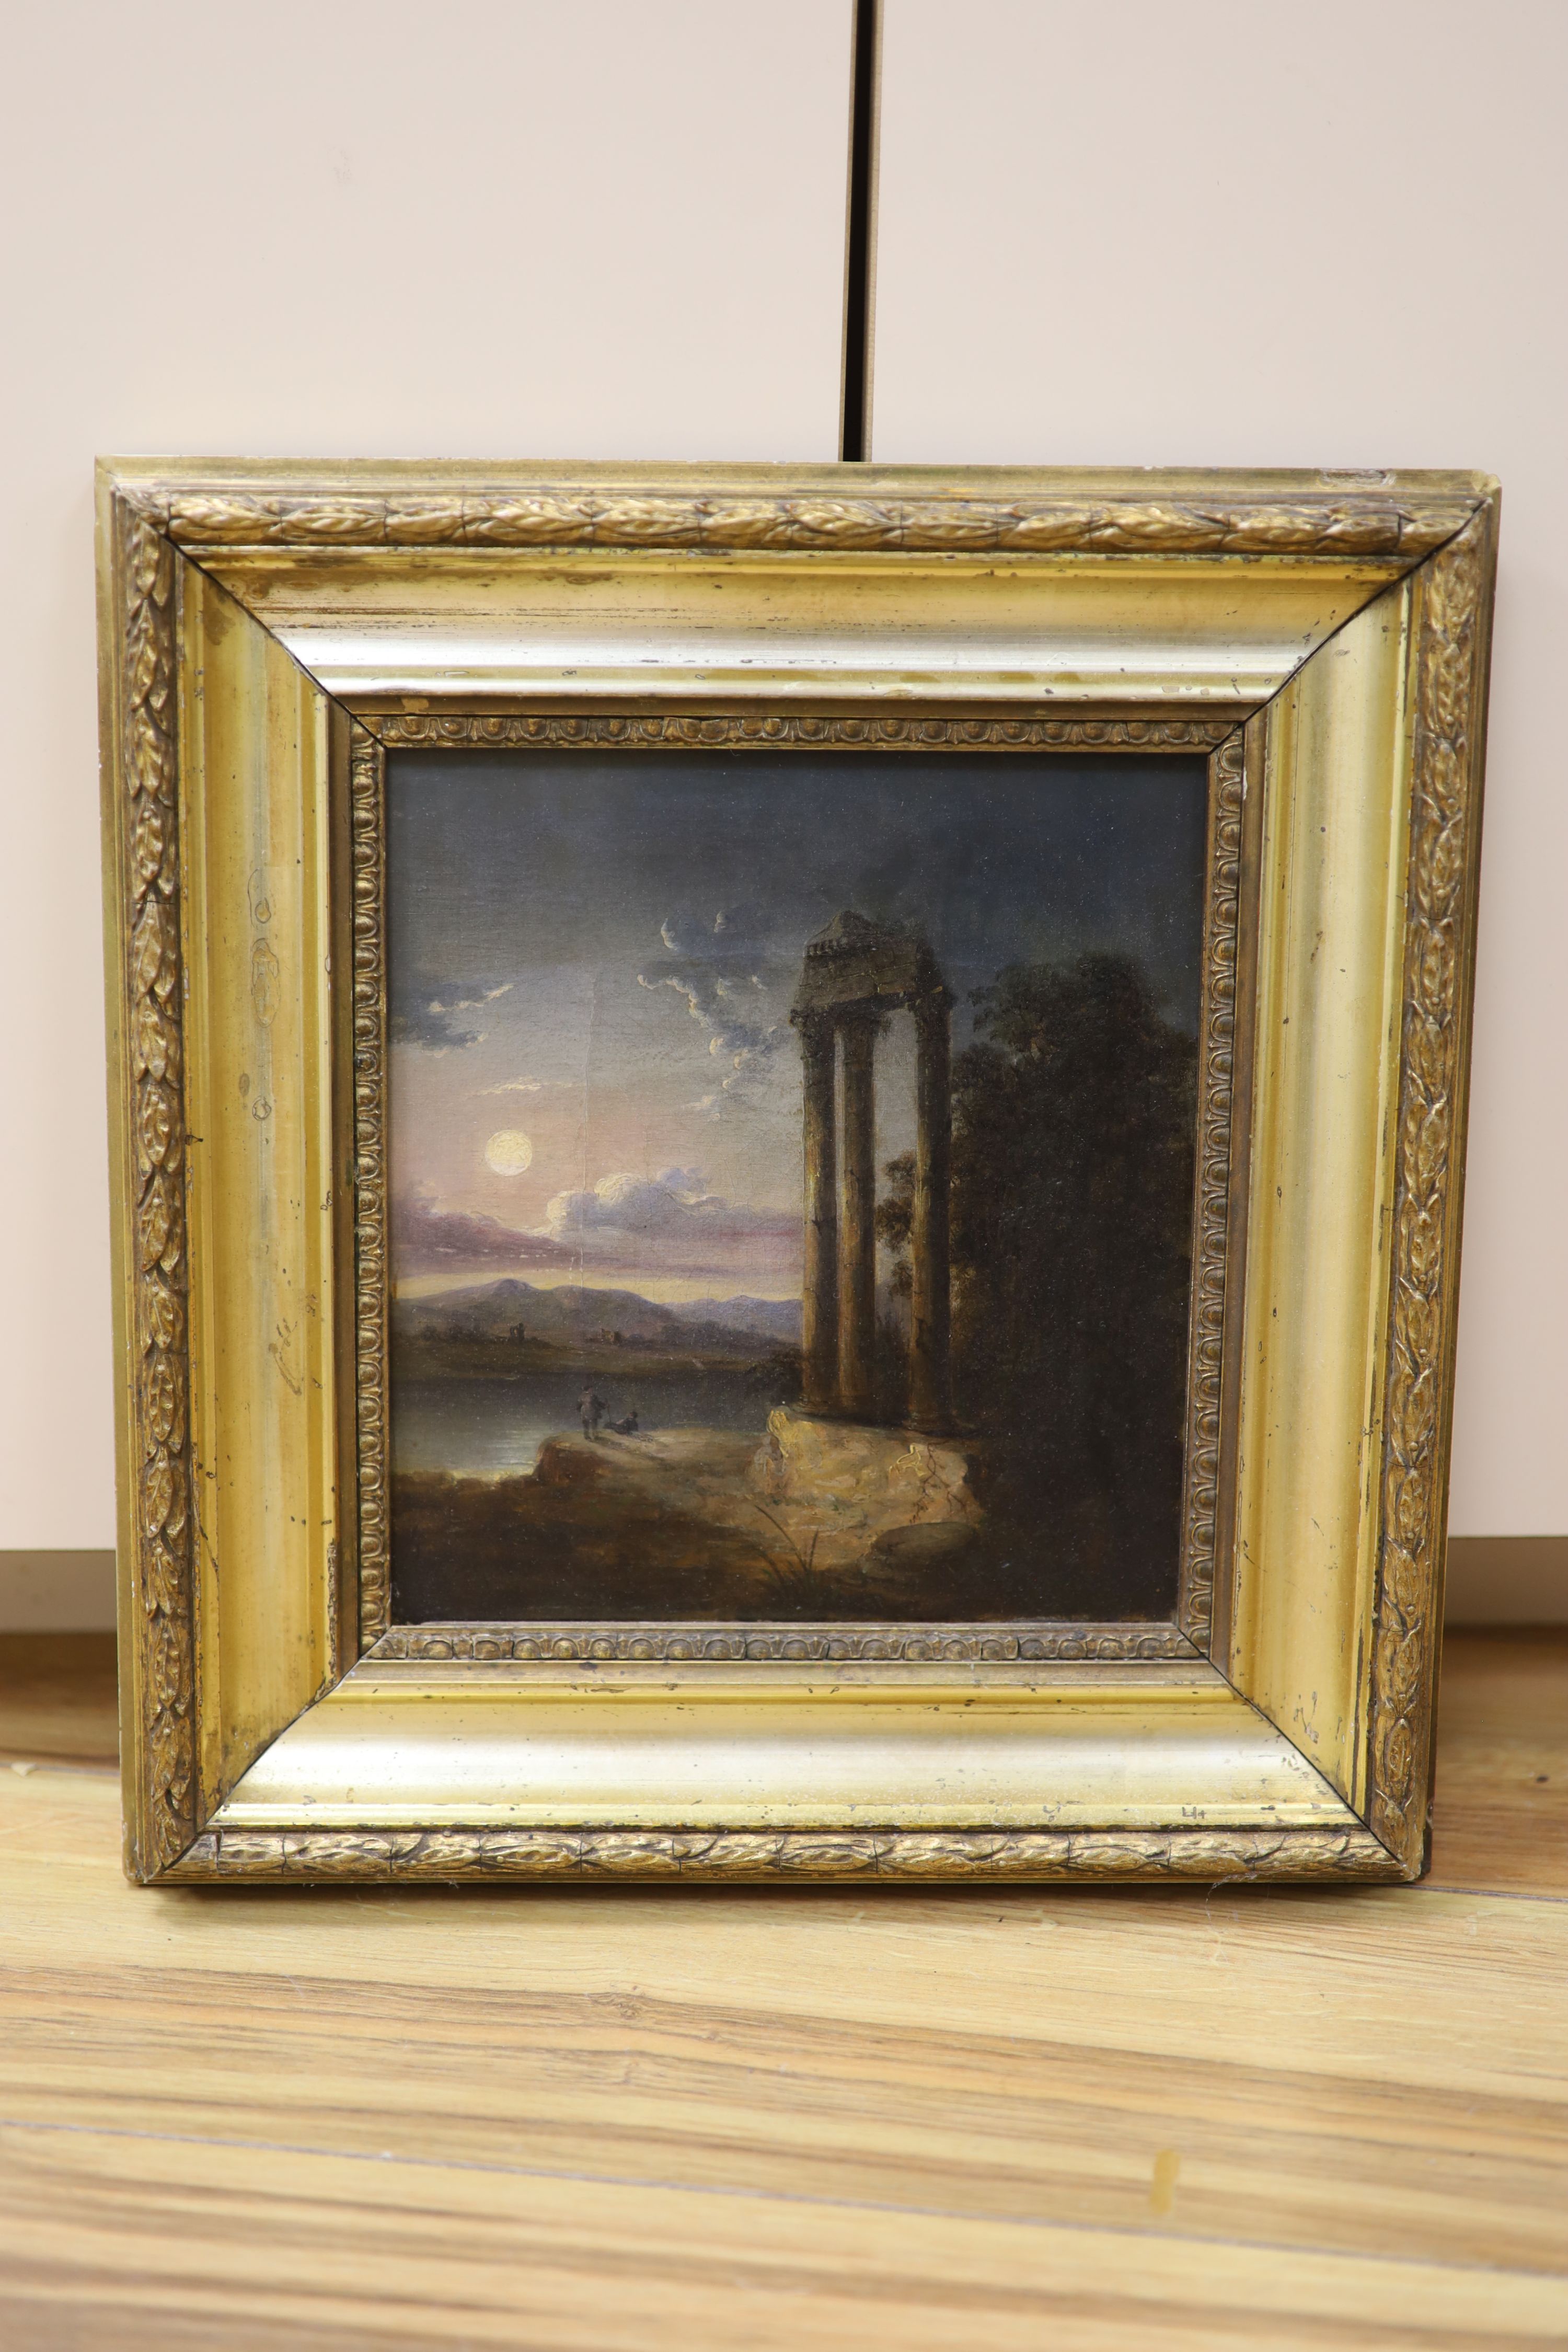 Early 19th century English School, oil on canvas, Moonlit landscape with ruins, 22 x 20cm - Image 2 of 3